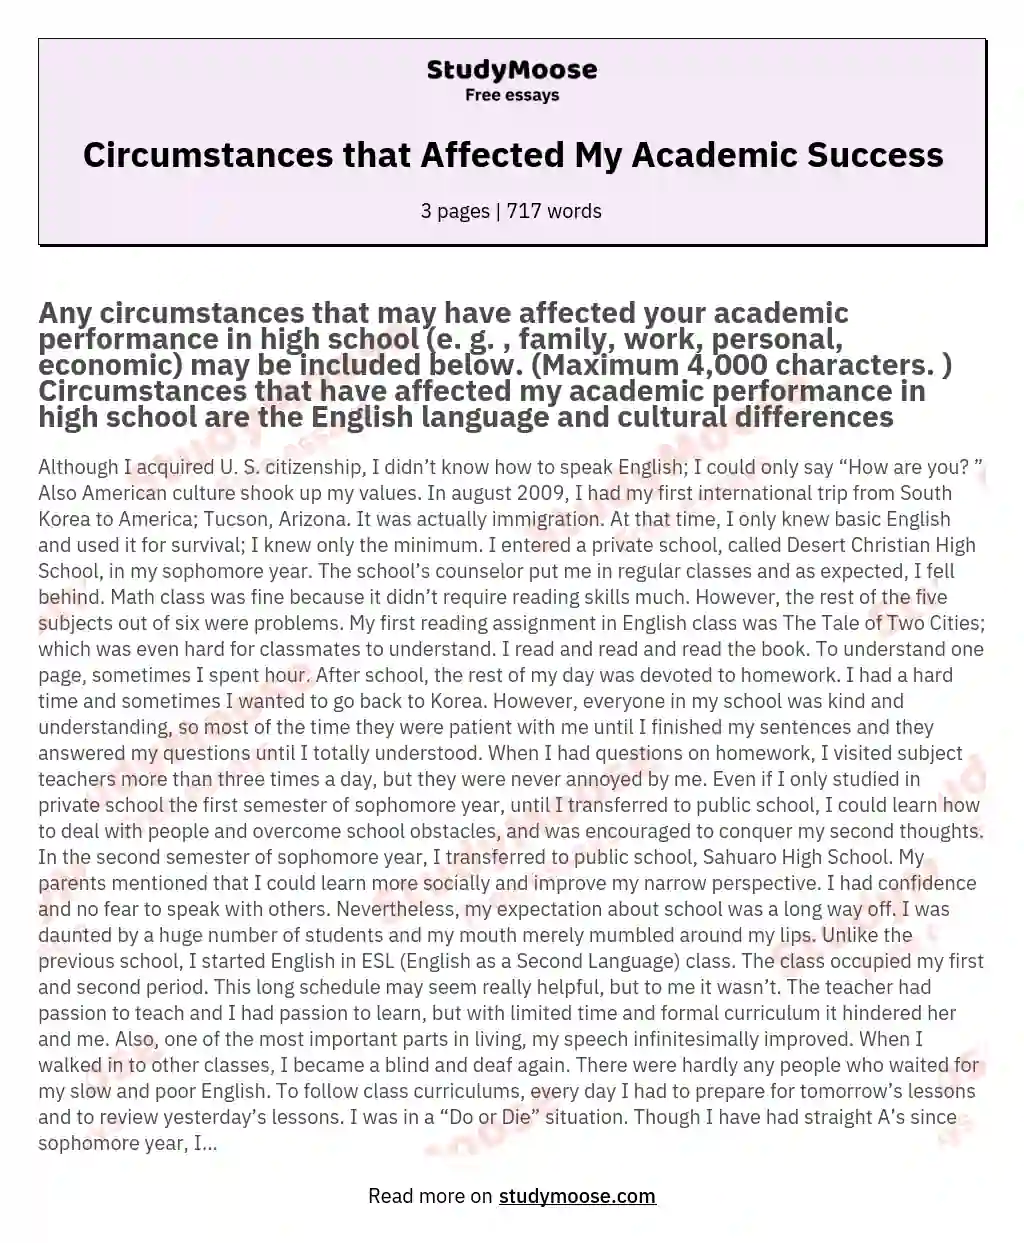 Circumstances that Affected My Academic Success essay